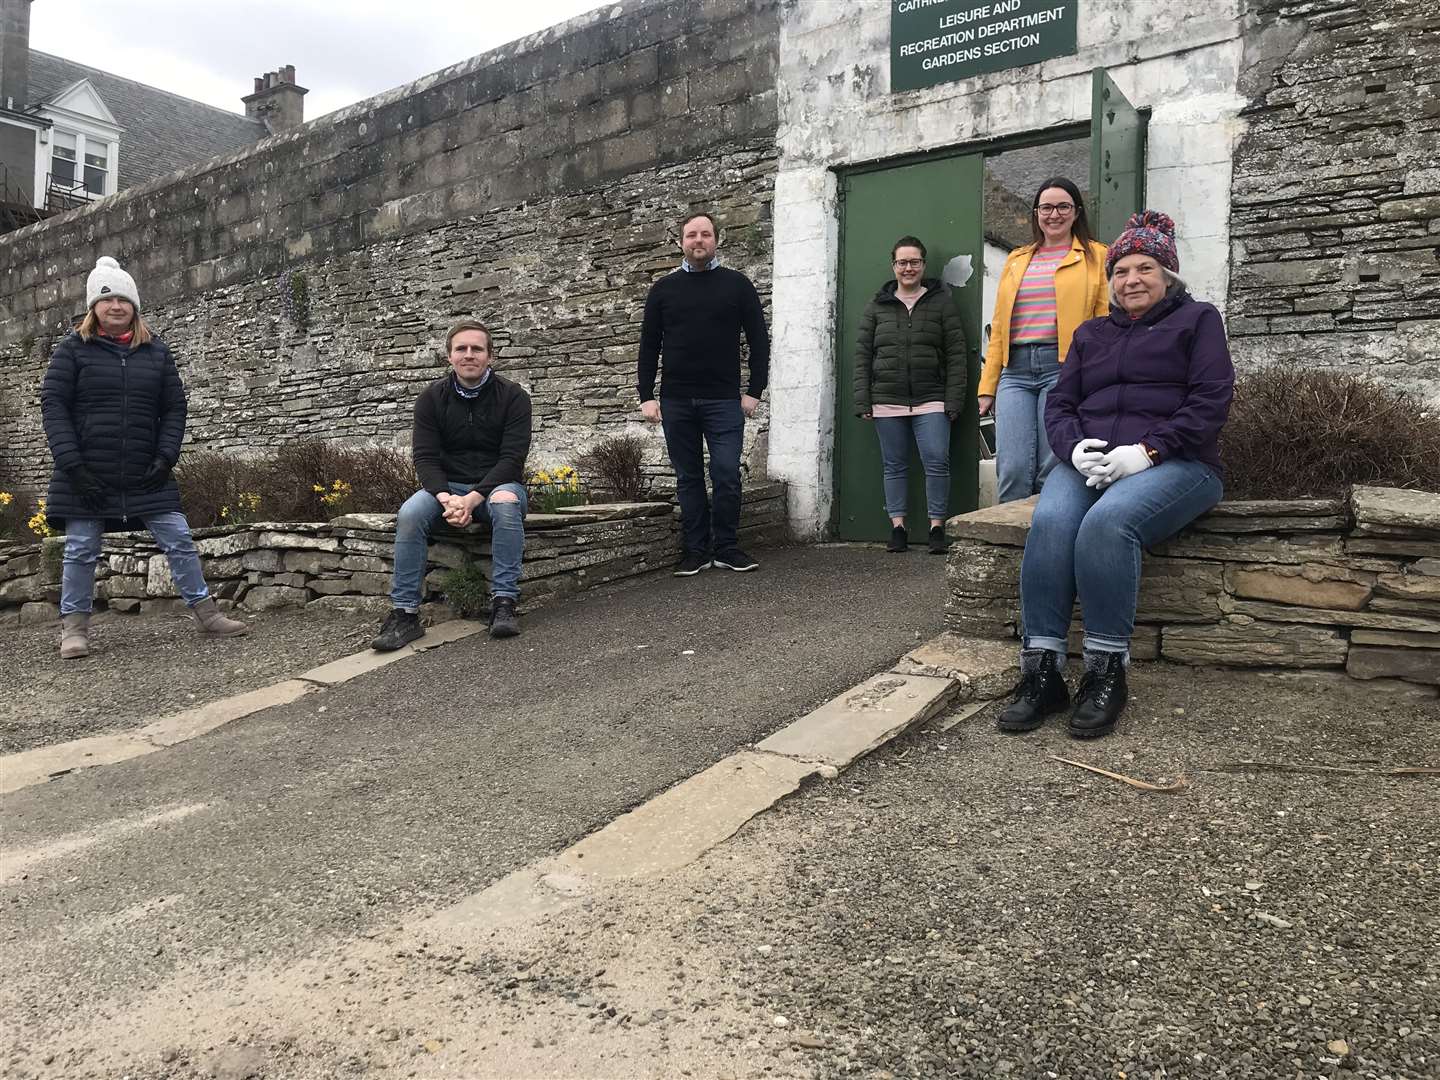 Thurso Community Benefit Board members (from left to right) Karon Jappy, Derek Manson, Iain Carlisle, Emma Bremner, Marion O’Brien and Helen Allan outside the Thurso greenhouses complex.